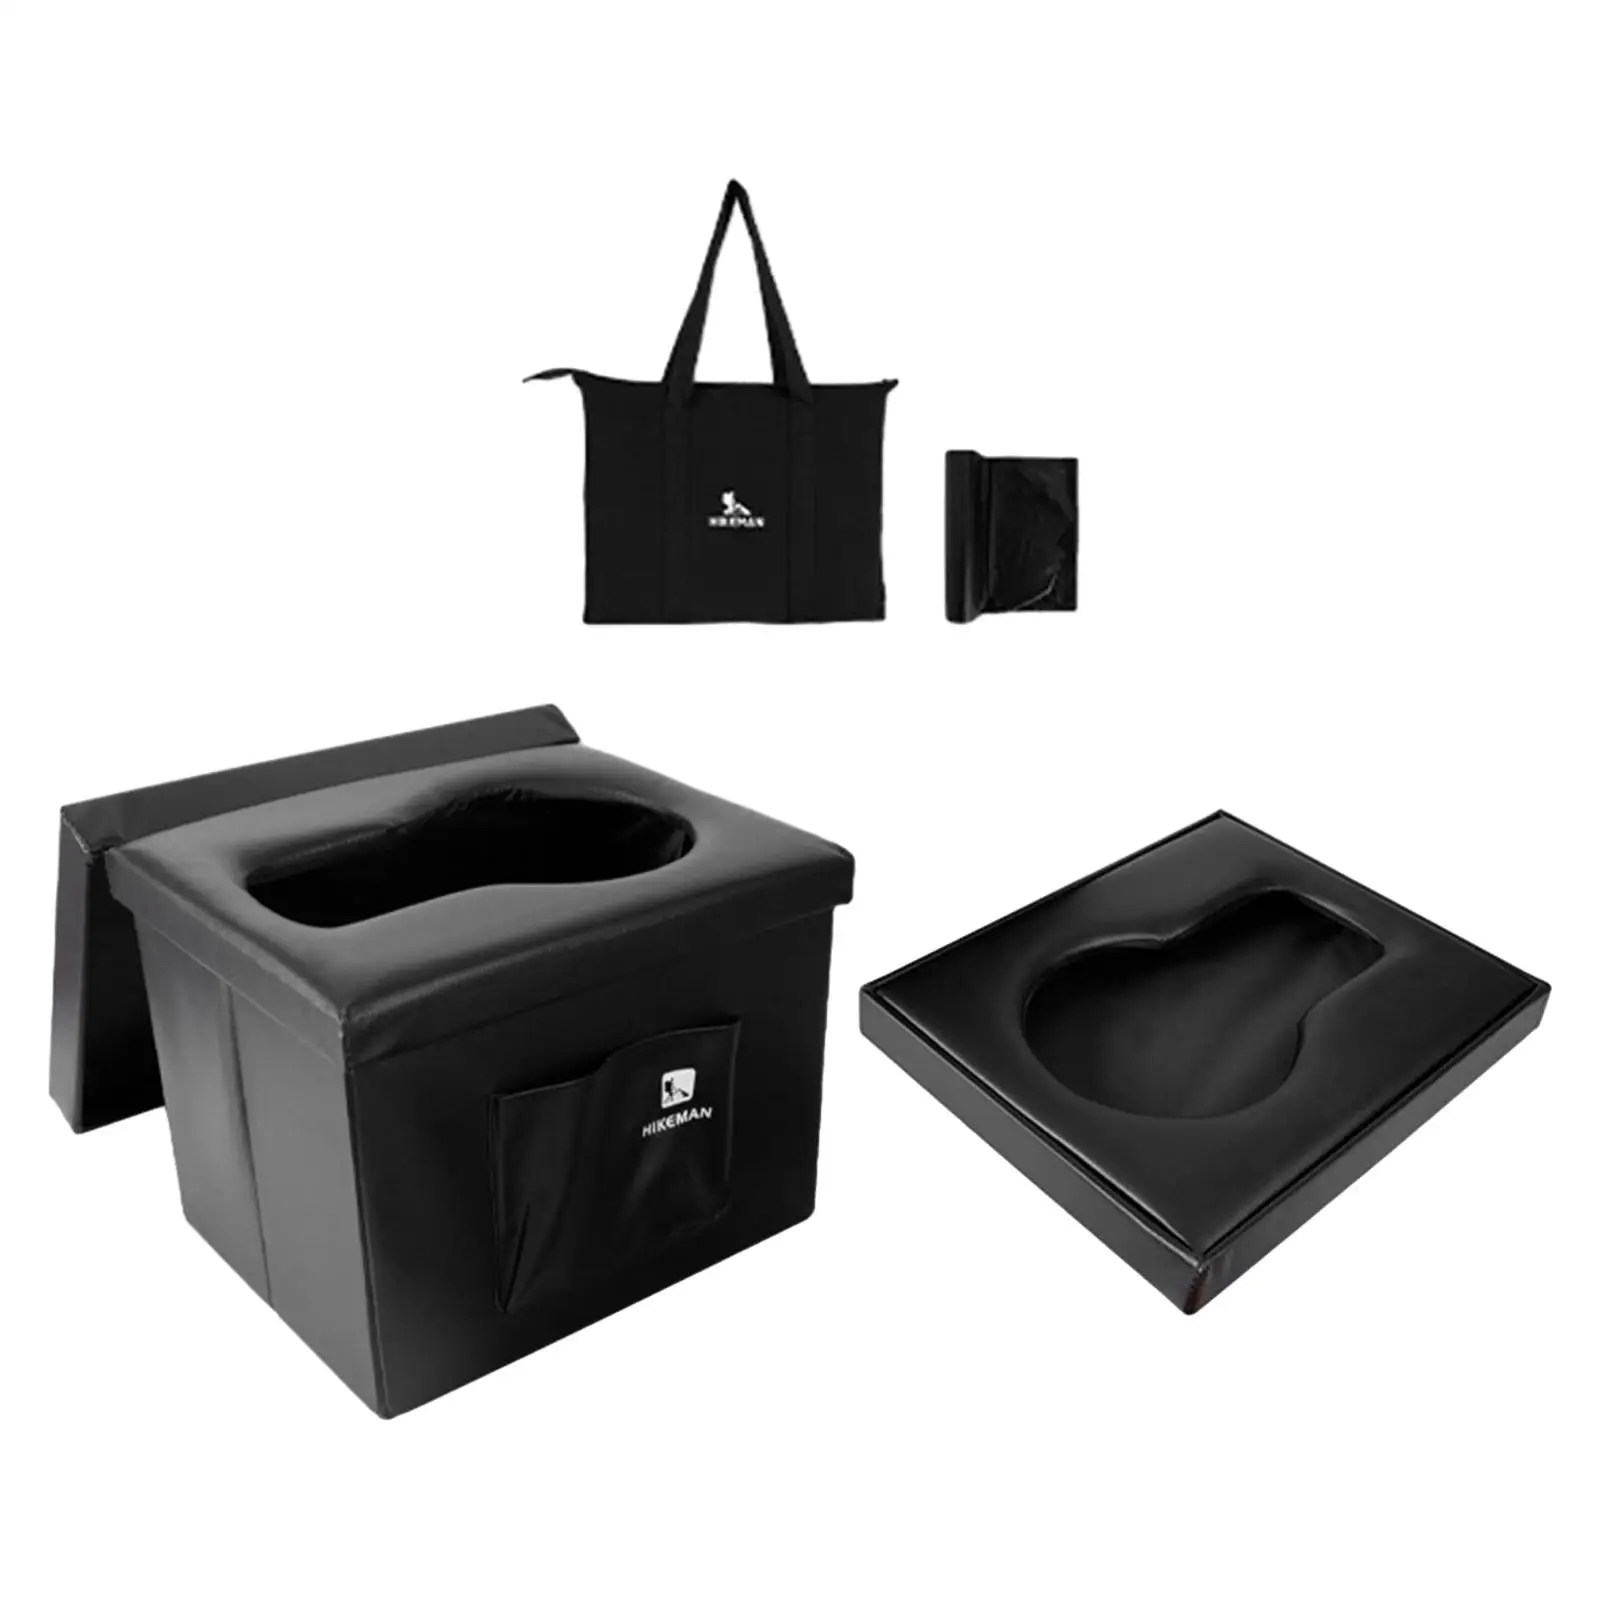 Portable Folding Toilet Durable Seating Stool with Cover Travel Potty Bucket Toilet for Car Driving Home Boating Camping Beach